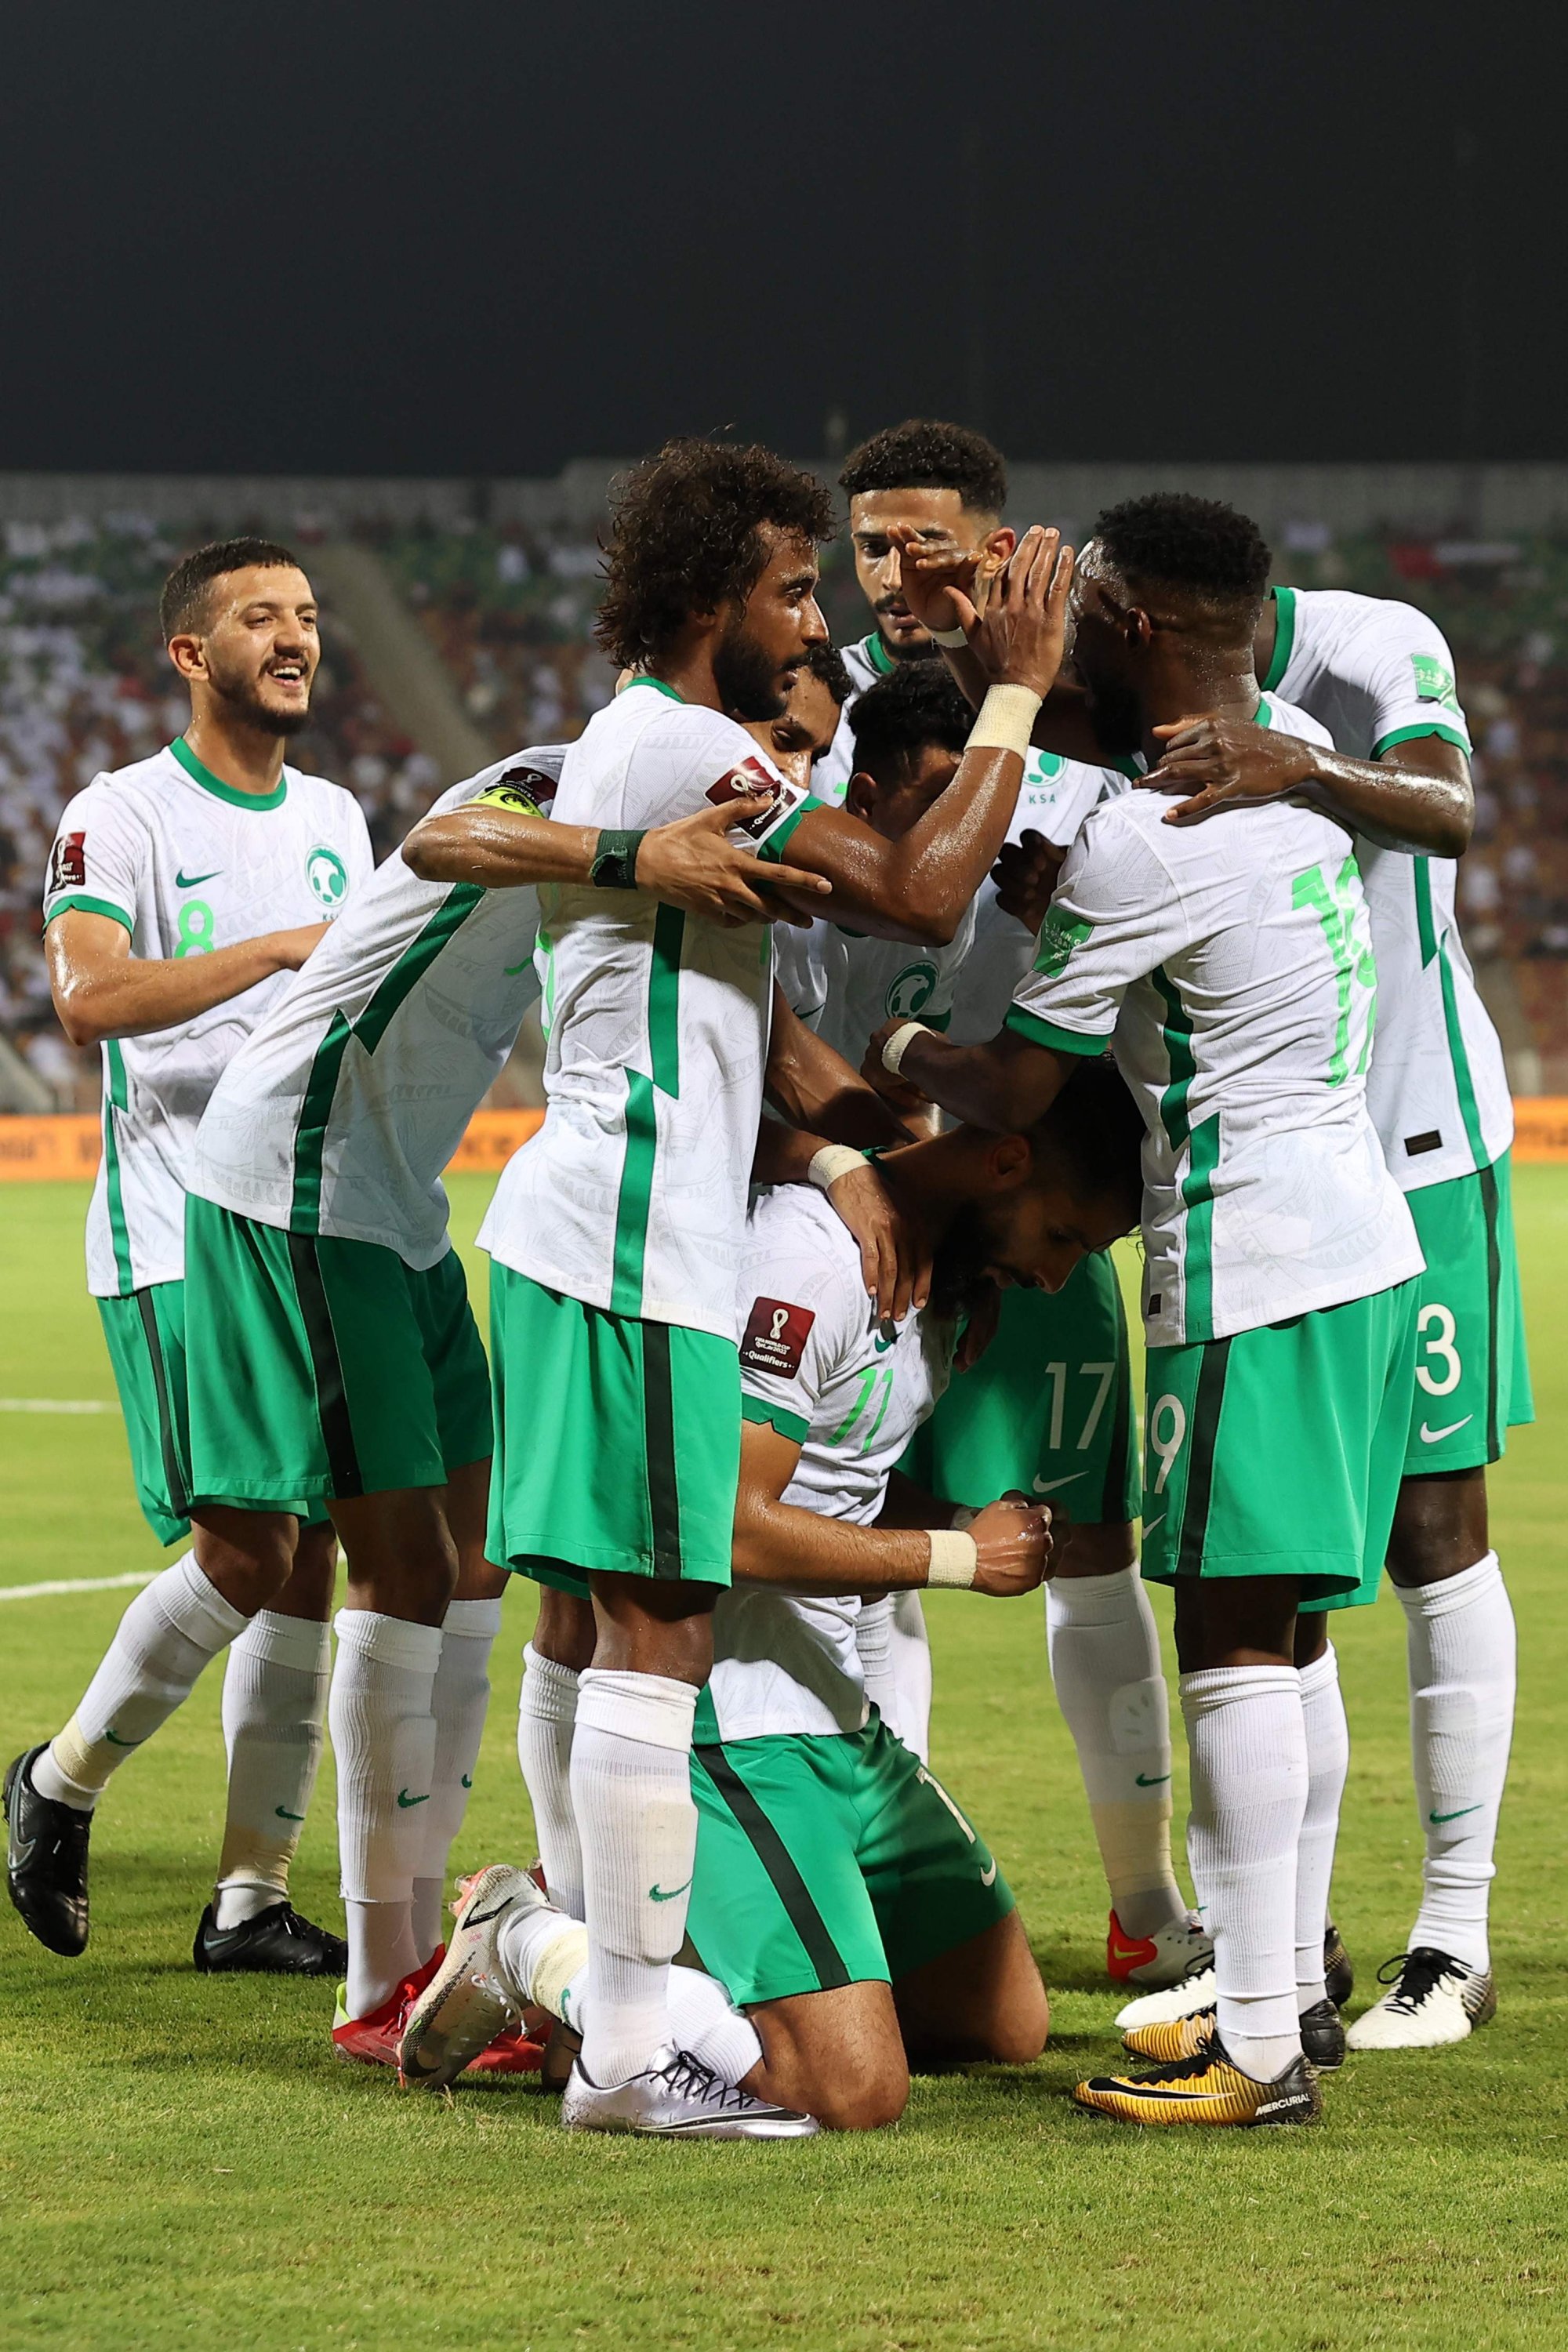 Saudi's players celebrate their opening goal during the 2022 Qatar football World Cup Asian Qualifiers match against Oman at the Sultan Qaboos Stadium in Muscat, Oman, Sept. 7, 2021. (AFP Photo)